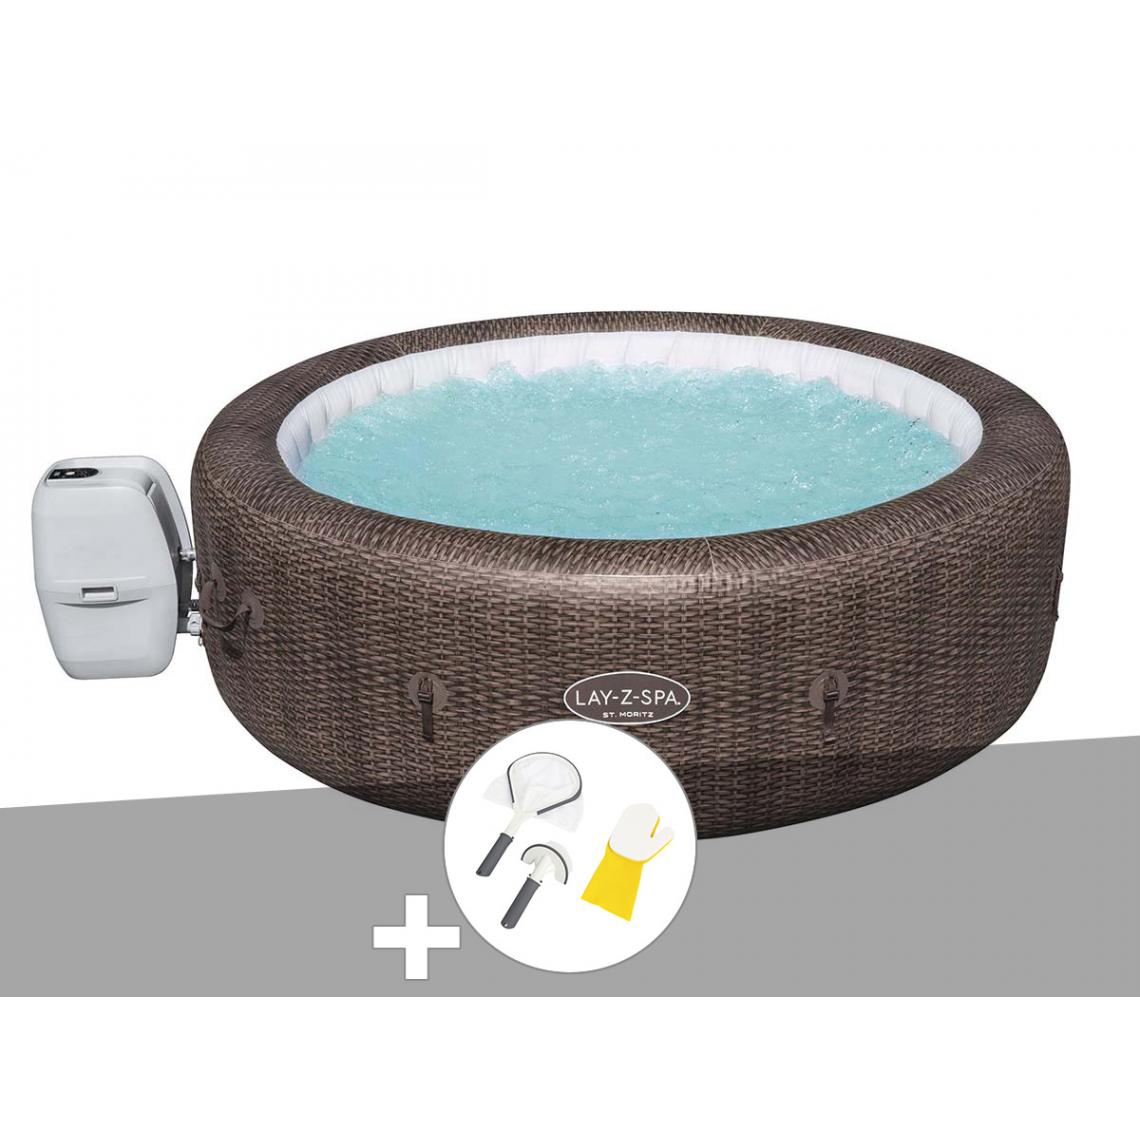 Bestway - Kit spa gonflable Bestway Lay-Z-Spa St Moritz rond Airjet 5/7 places + Kit de nettoyage - Spa gonflable